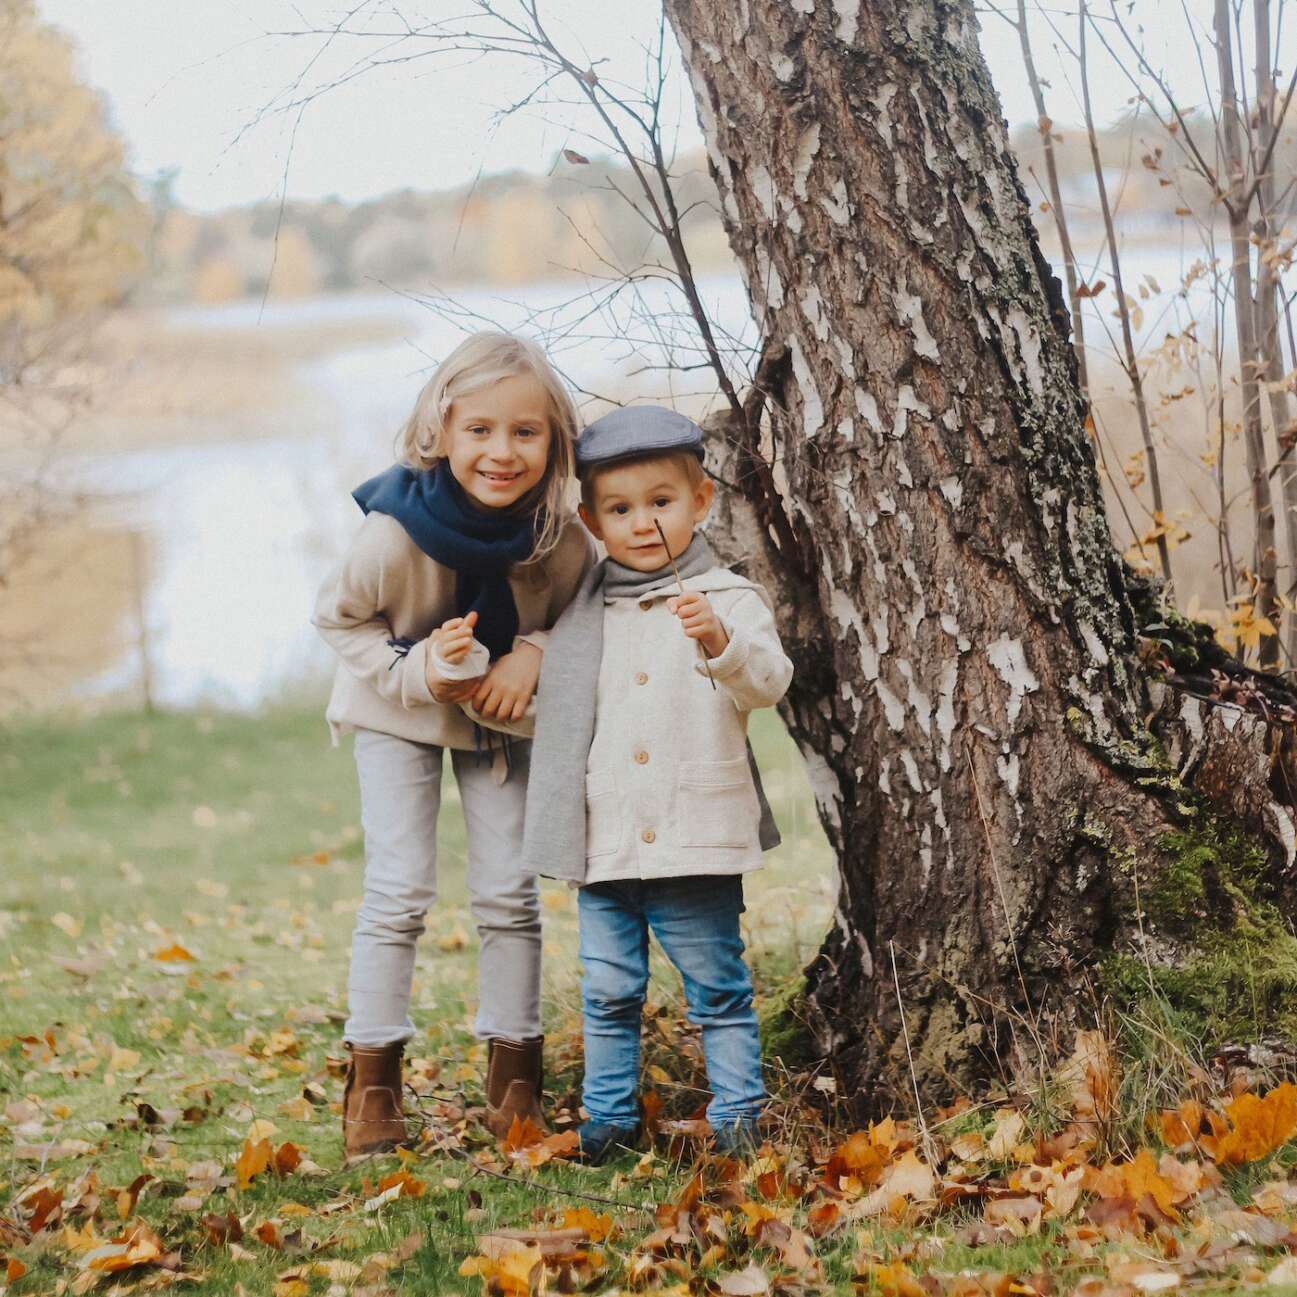 Two children photographed in an autumn scene standing next to a birch.